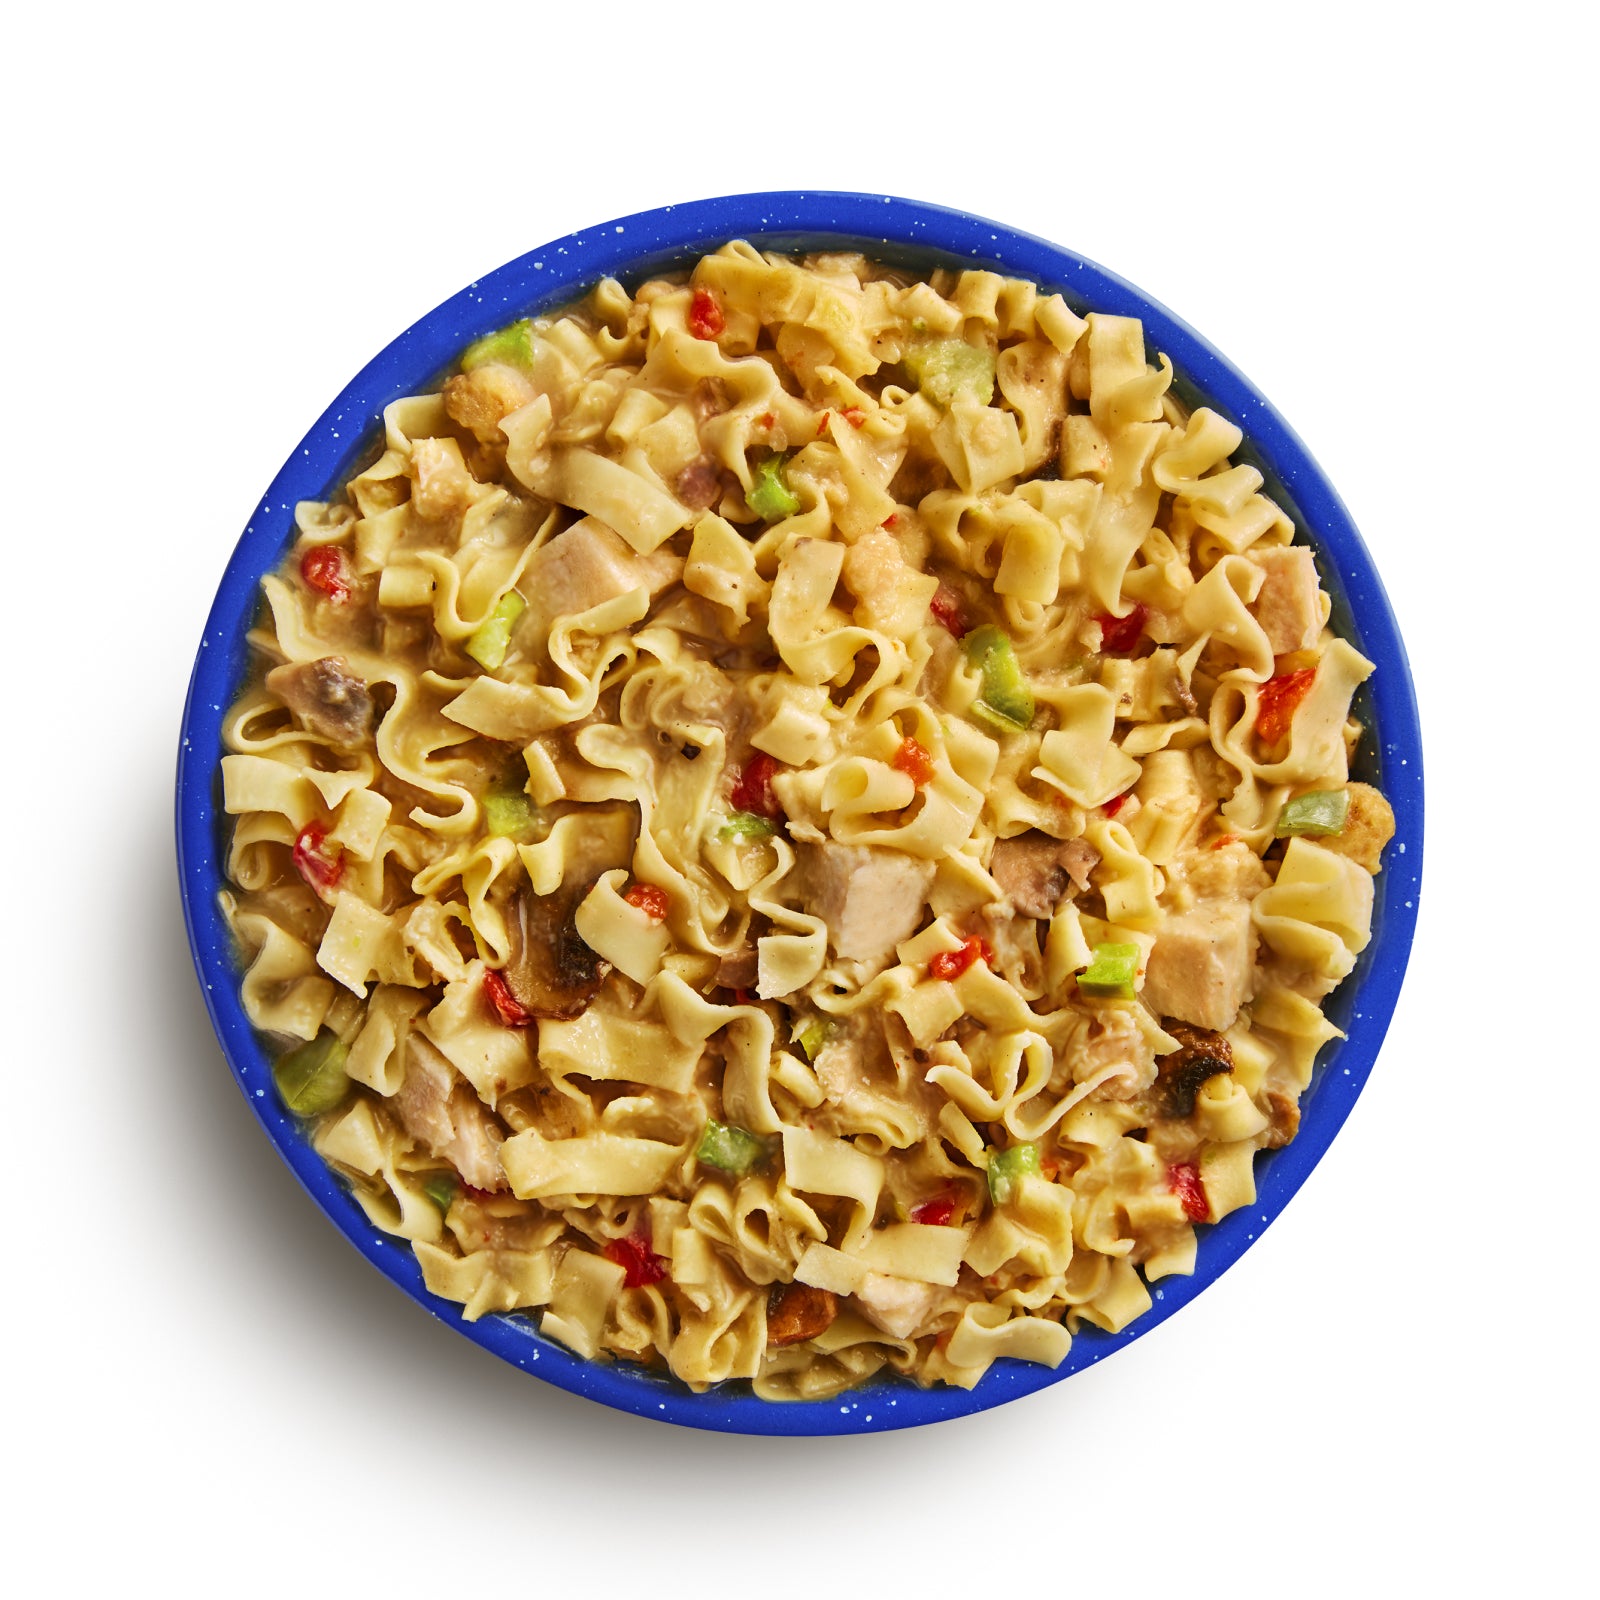 50161 Homestyle Chicken Noodle Casserole Prepared Freeze-Dried Backcountry Meal